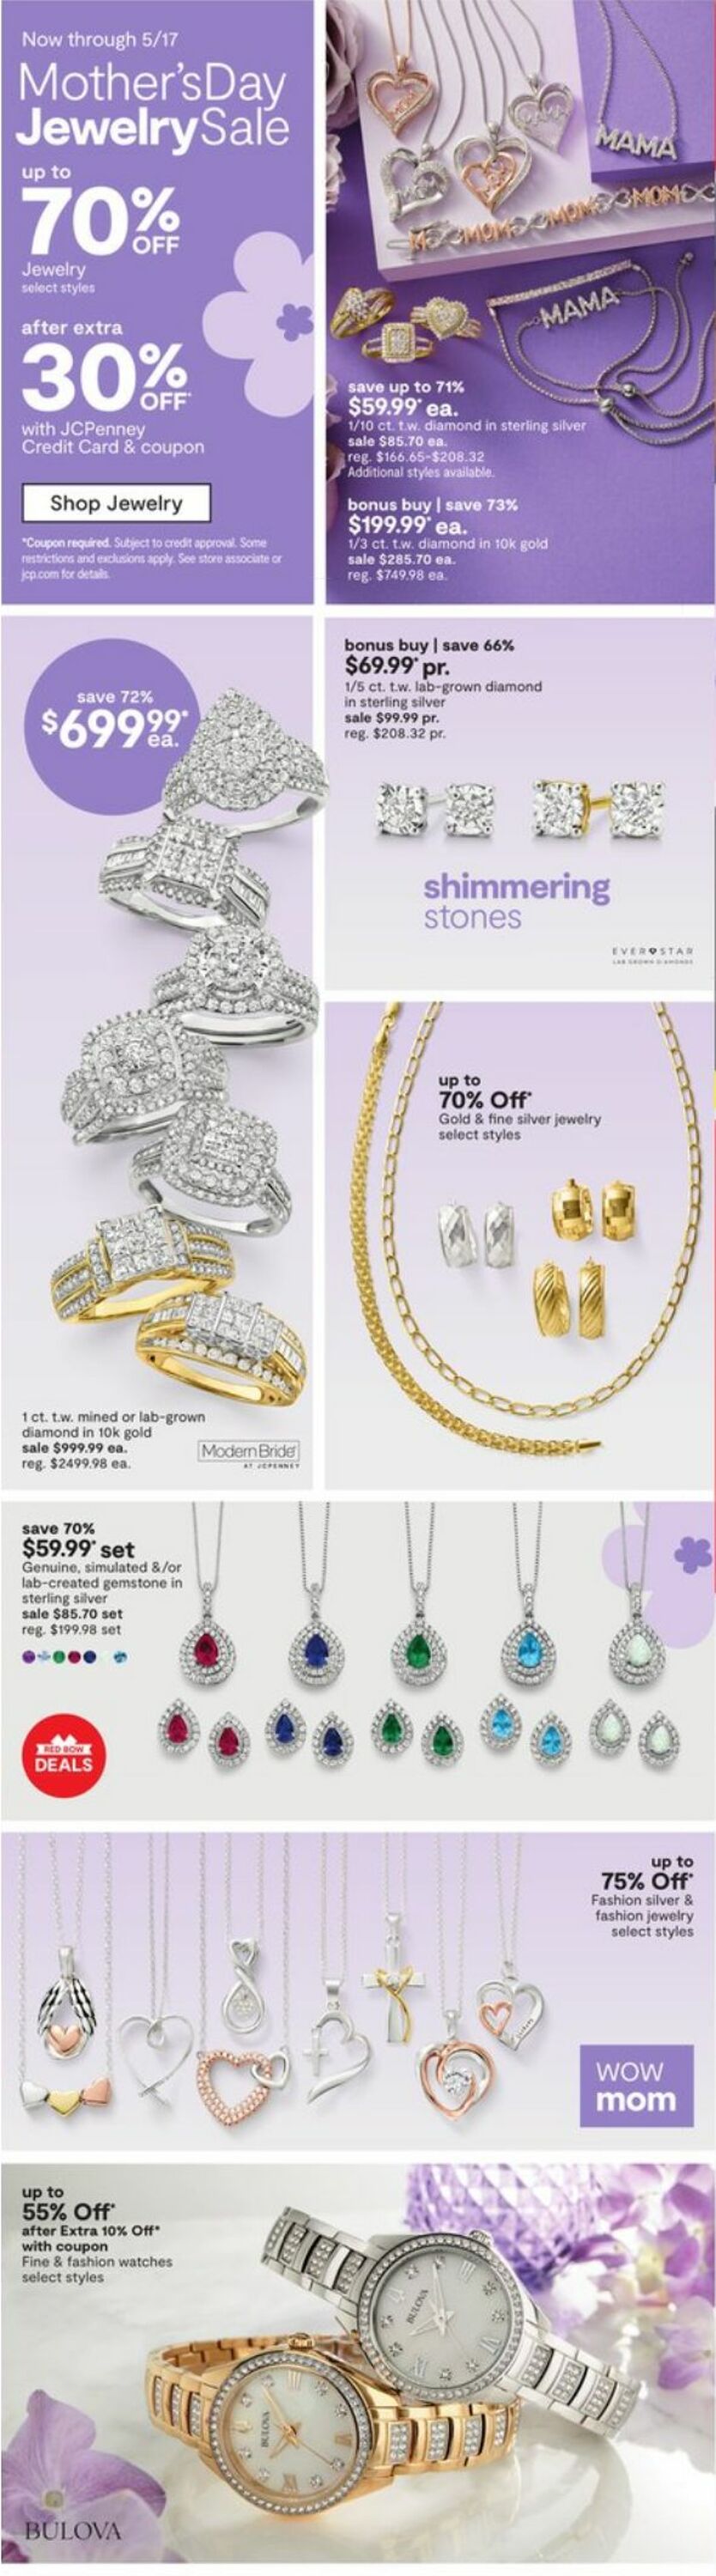 JCPenney Ad from 04/20/2023